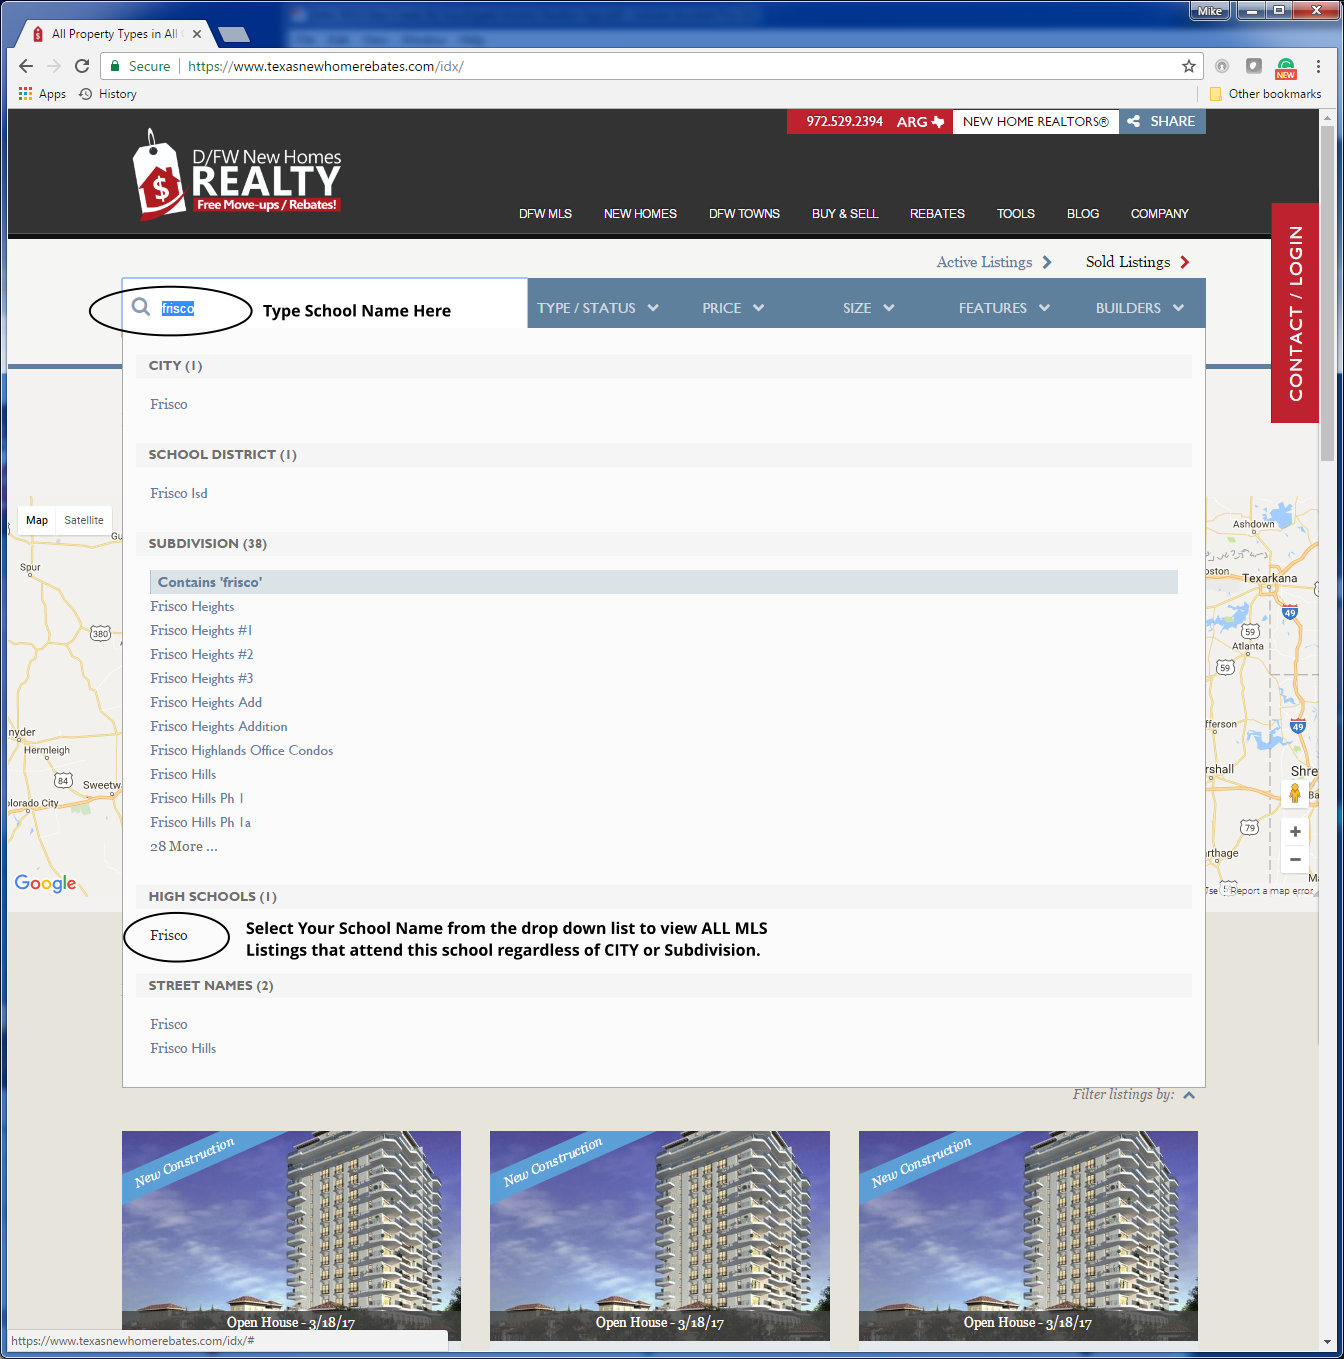 Click to Select the Proper School in the Drop Down Menu to View ALL MLS Listings, Regardless of City or Subdivision, that attend that school